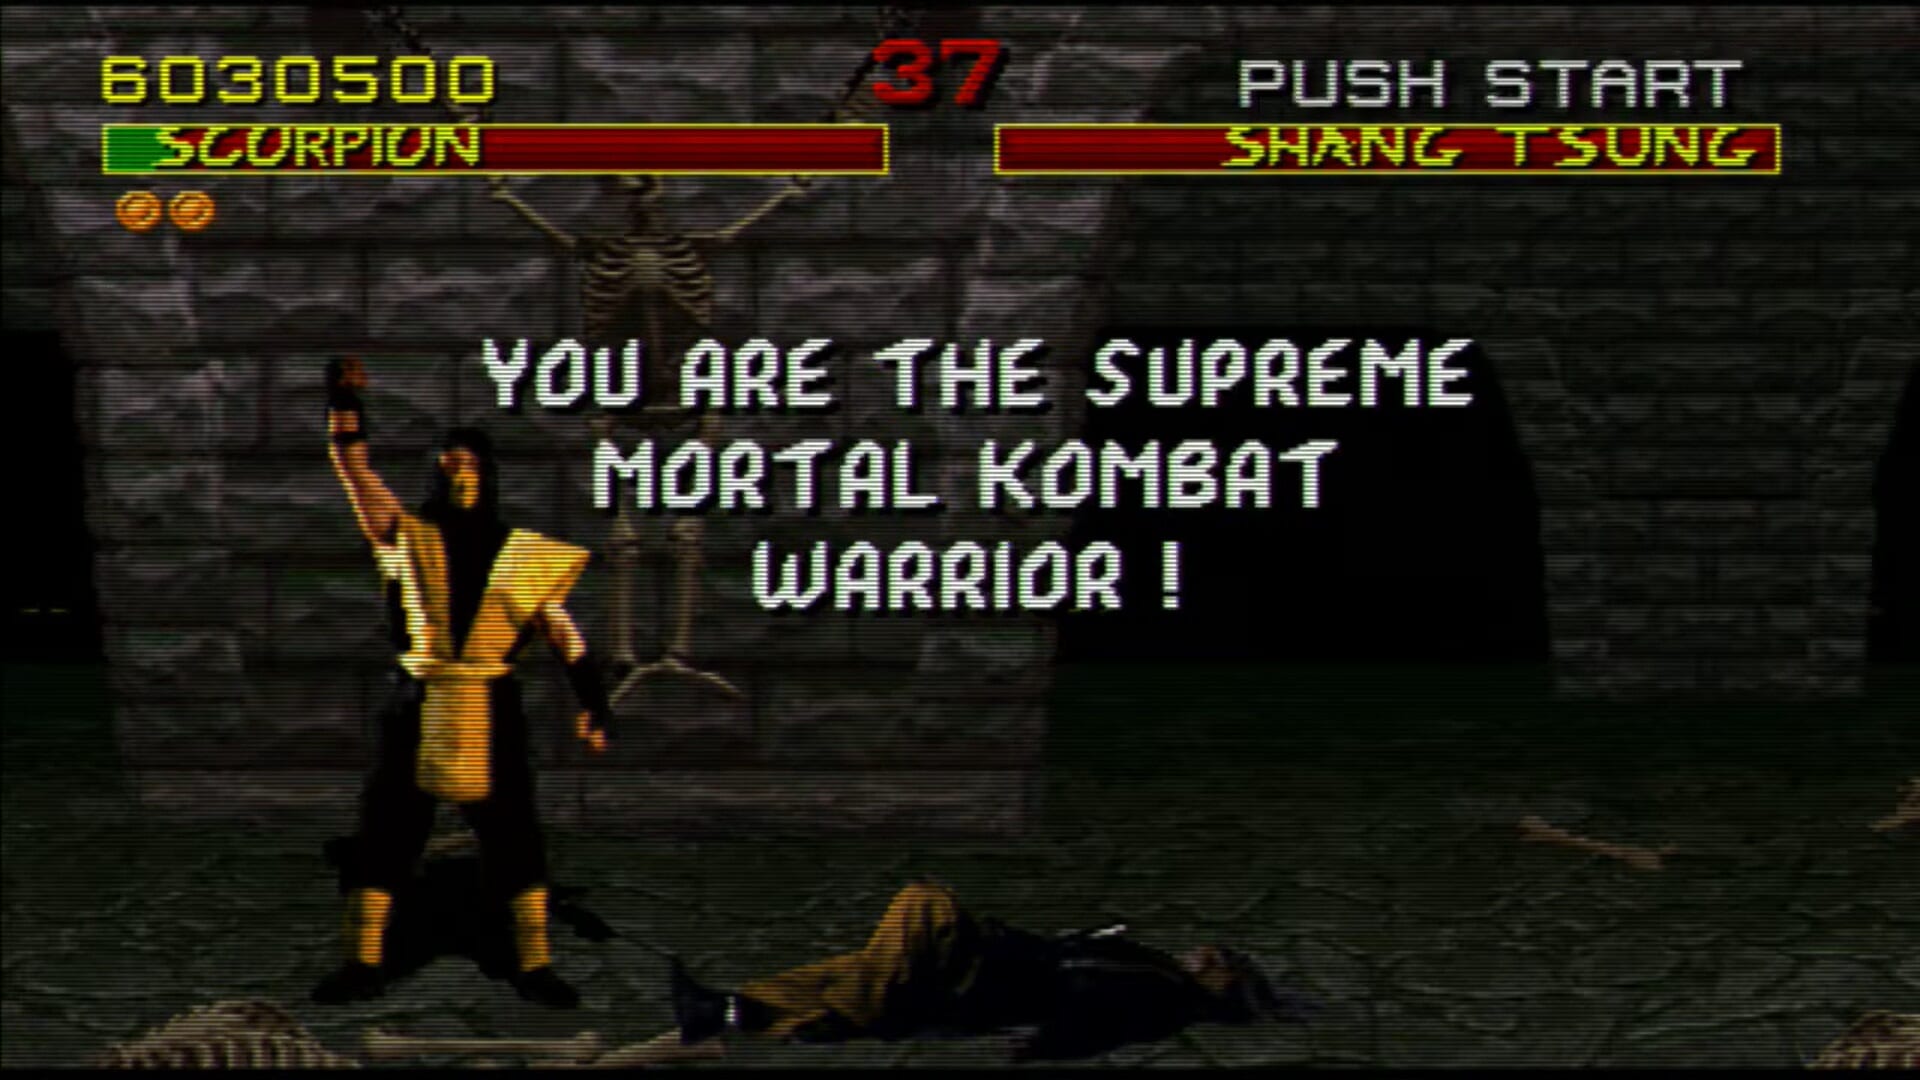 Mortal Kombat Scorpion's Fatality Evolution (From MK - MK11 Ultimate)  Mortal  Kombat's Scorpion has been lighting up people for decades. Here's a look at  the fire-spitting ninja's brutal fatalities over the